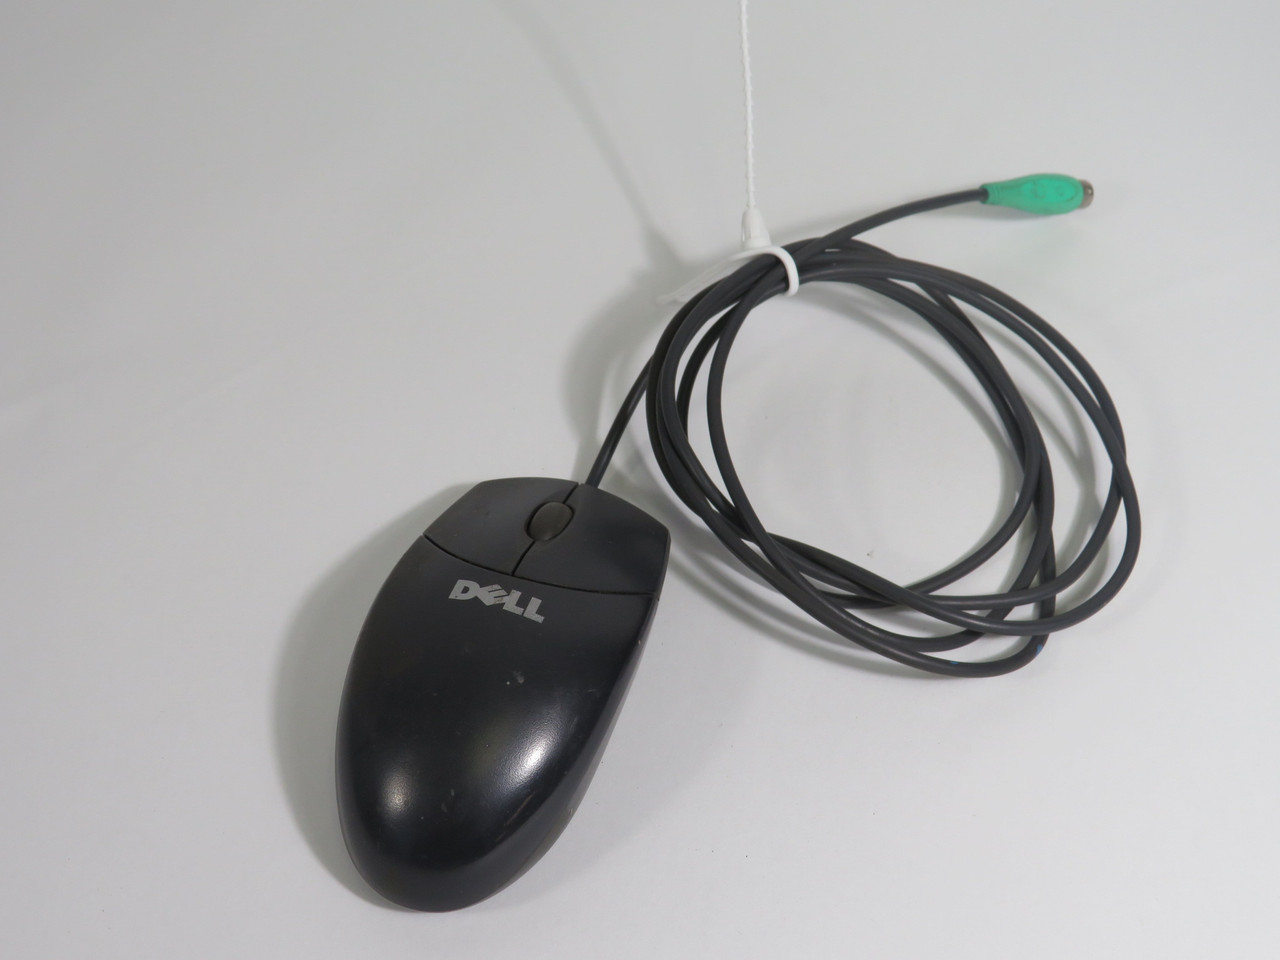 Dell M-S69 Wired Mouse With Scroll Ball USED